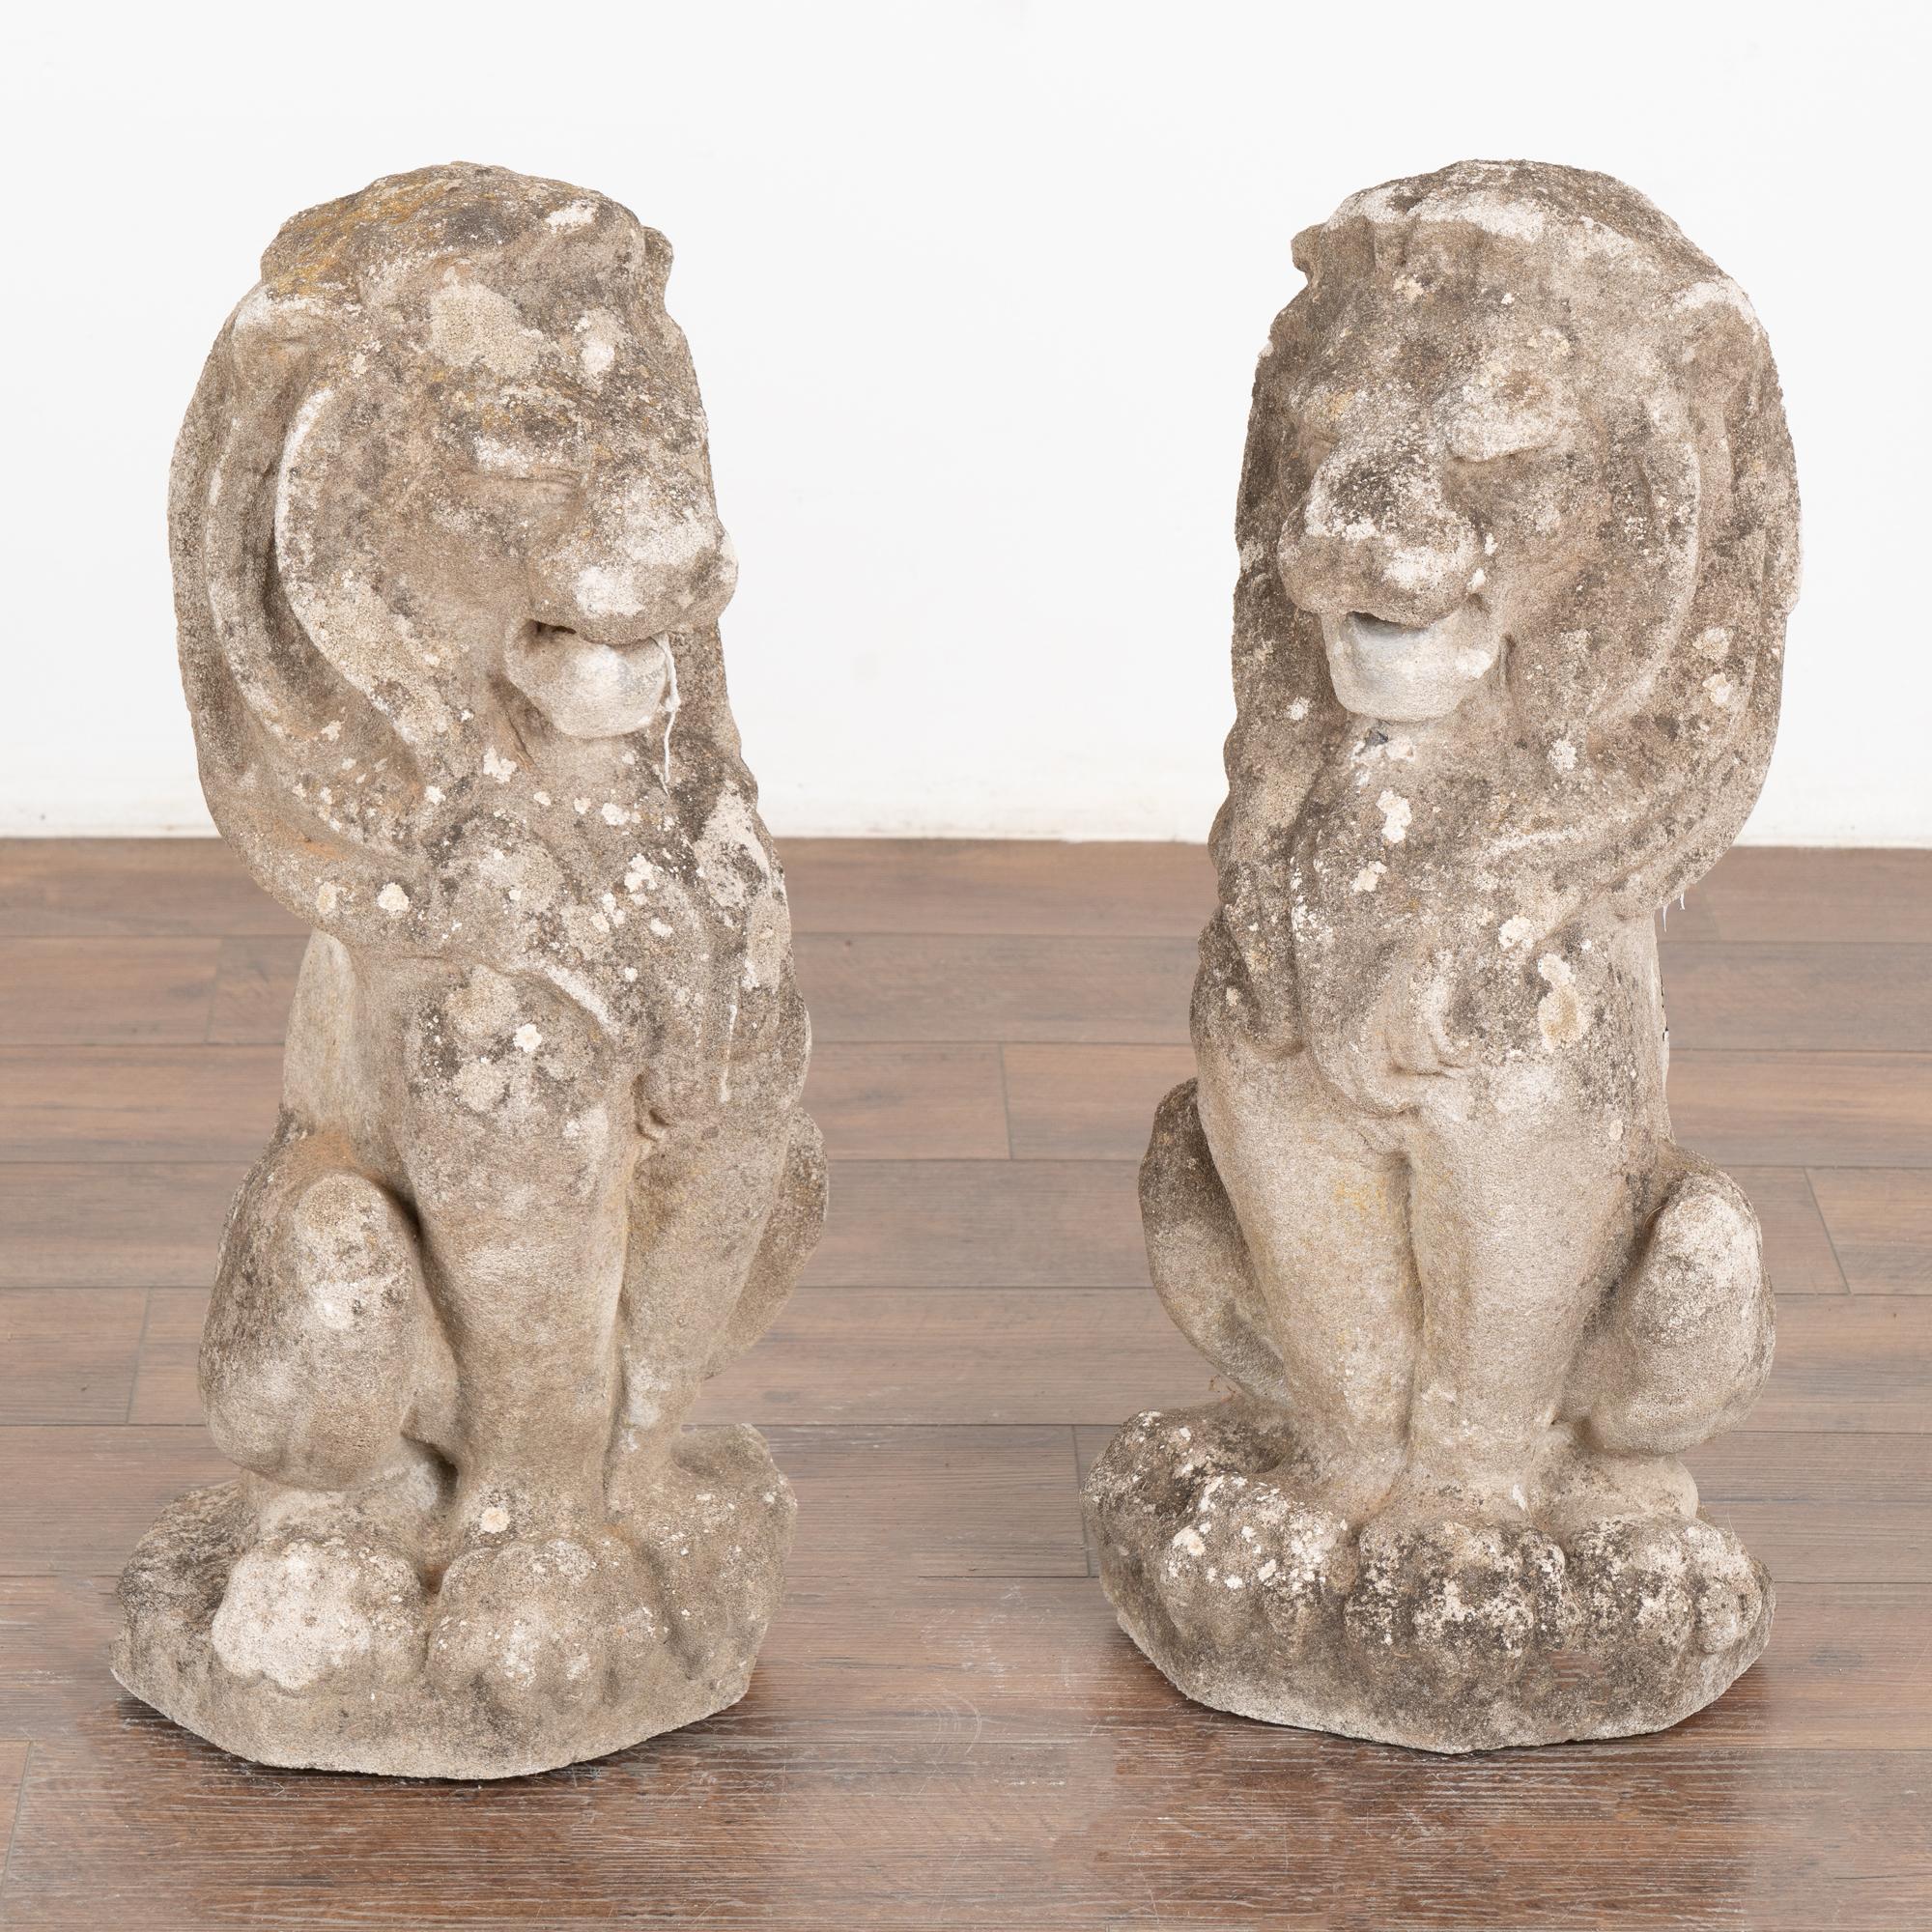 Pair, early 20th century French lion statues carved in limestone. Male lions with handsome mane are in sitting position.
The aged patina including distress to finish, wear, old lichen/stains, pitting all reflect generations of sitting outside in the